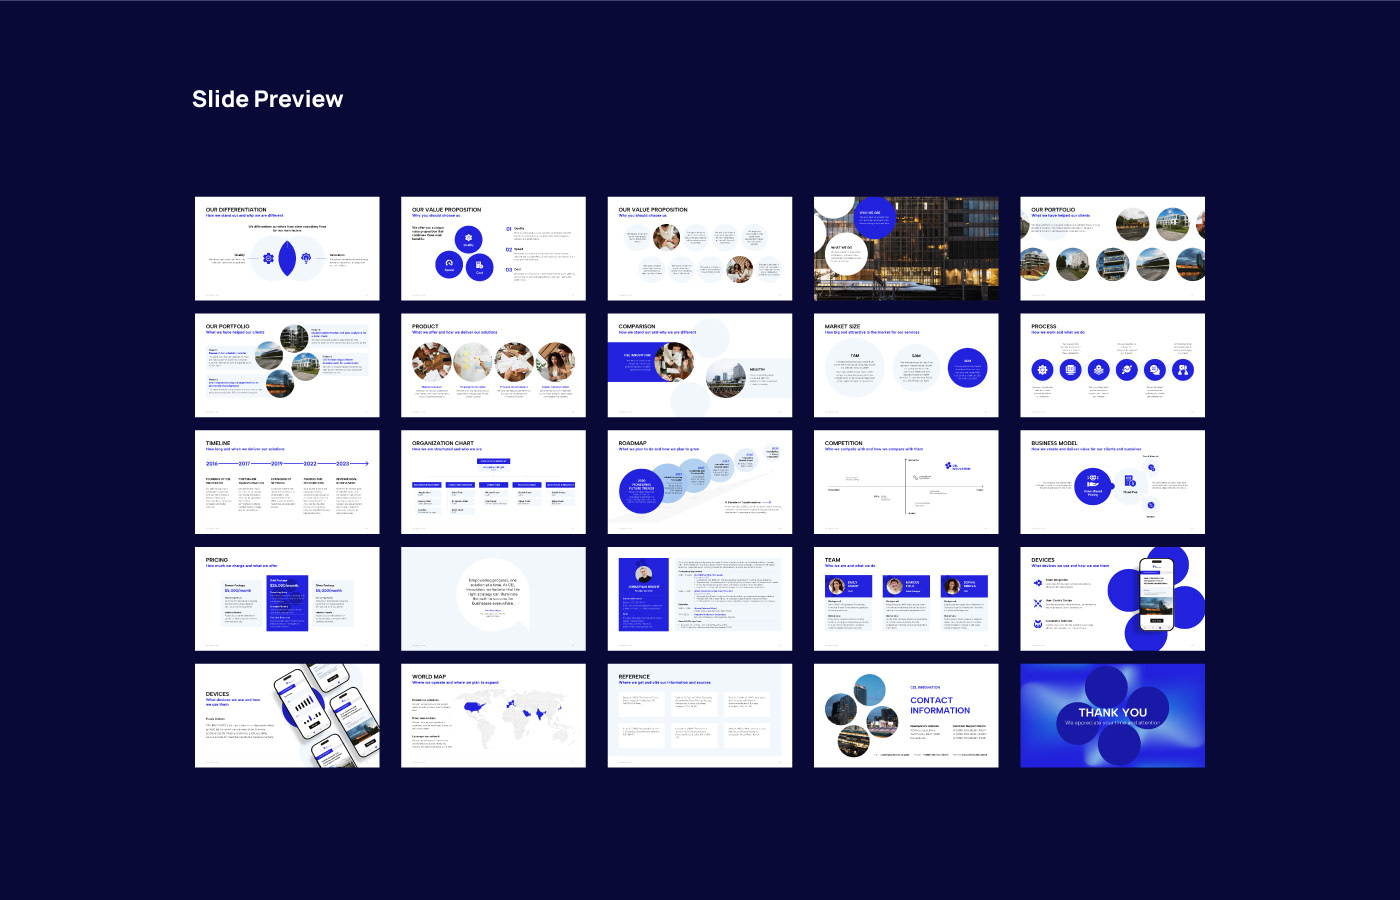 presentation presentation design PPT PPT template Powerpoint powerpoint template business Consulting innovation modern